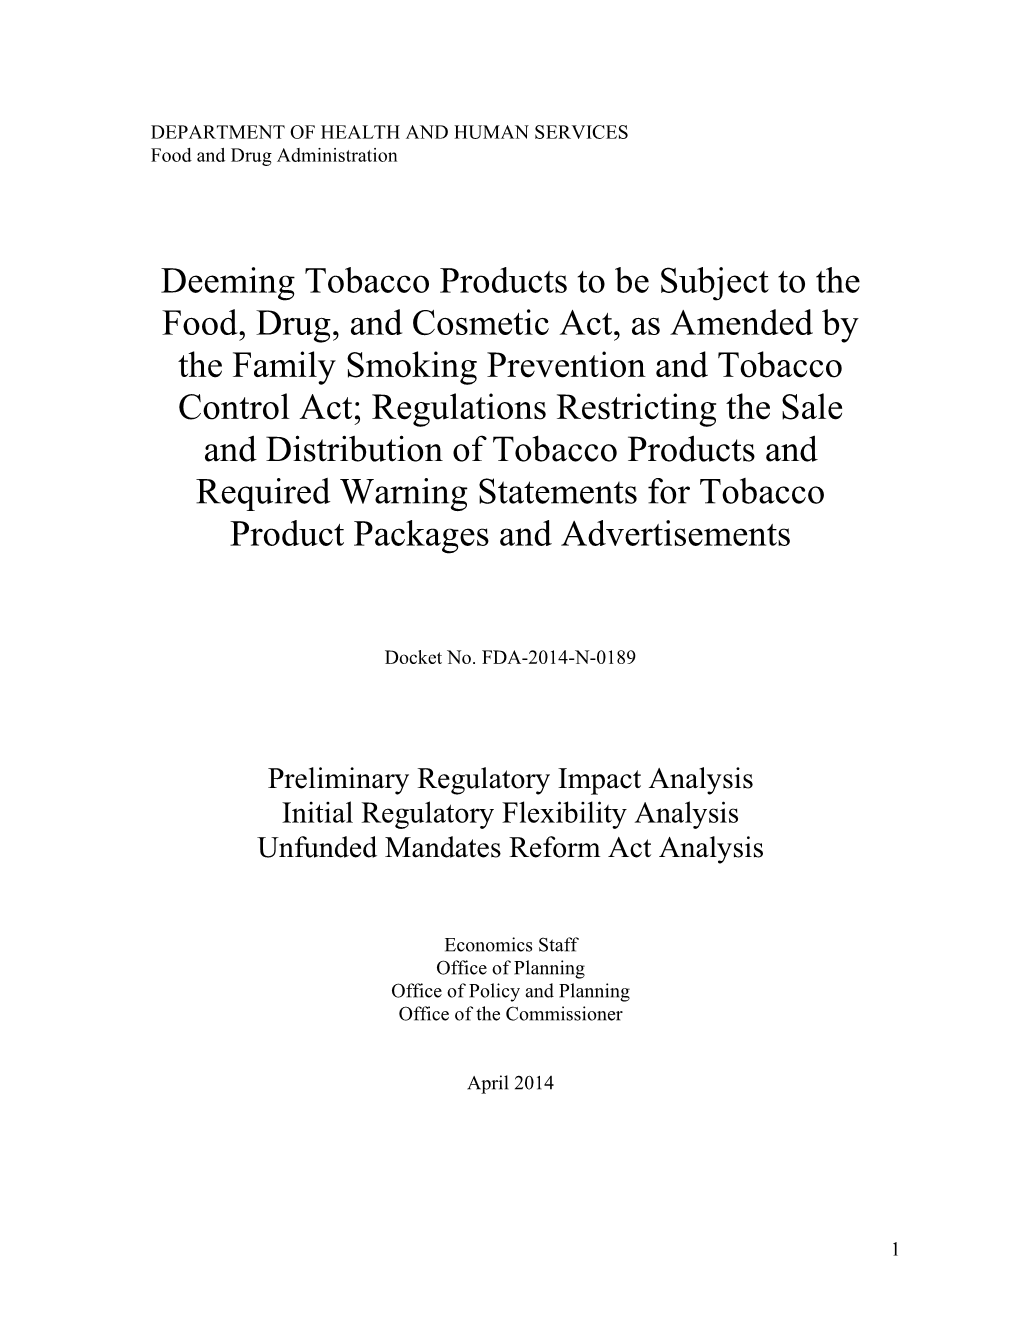 Deeming Tobacco Products to Be Subject To